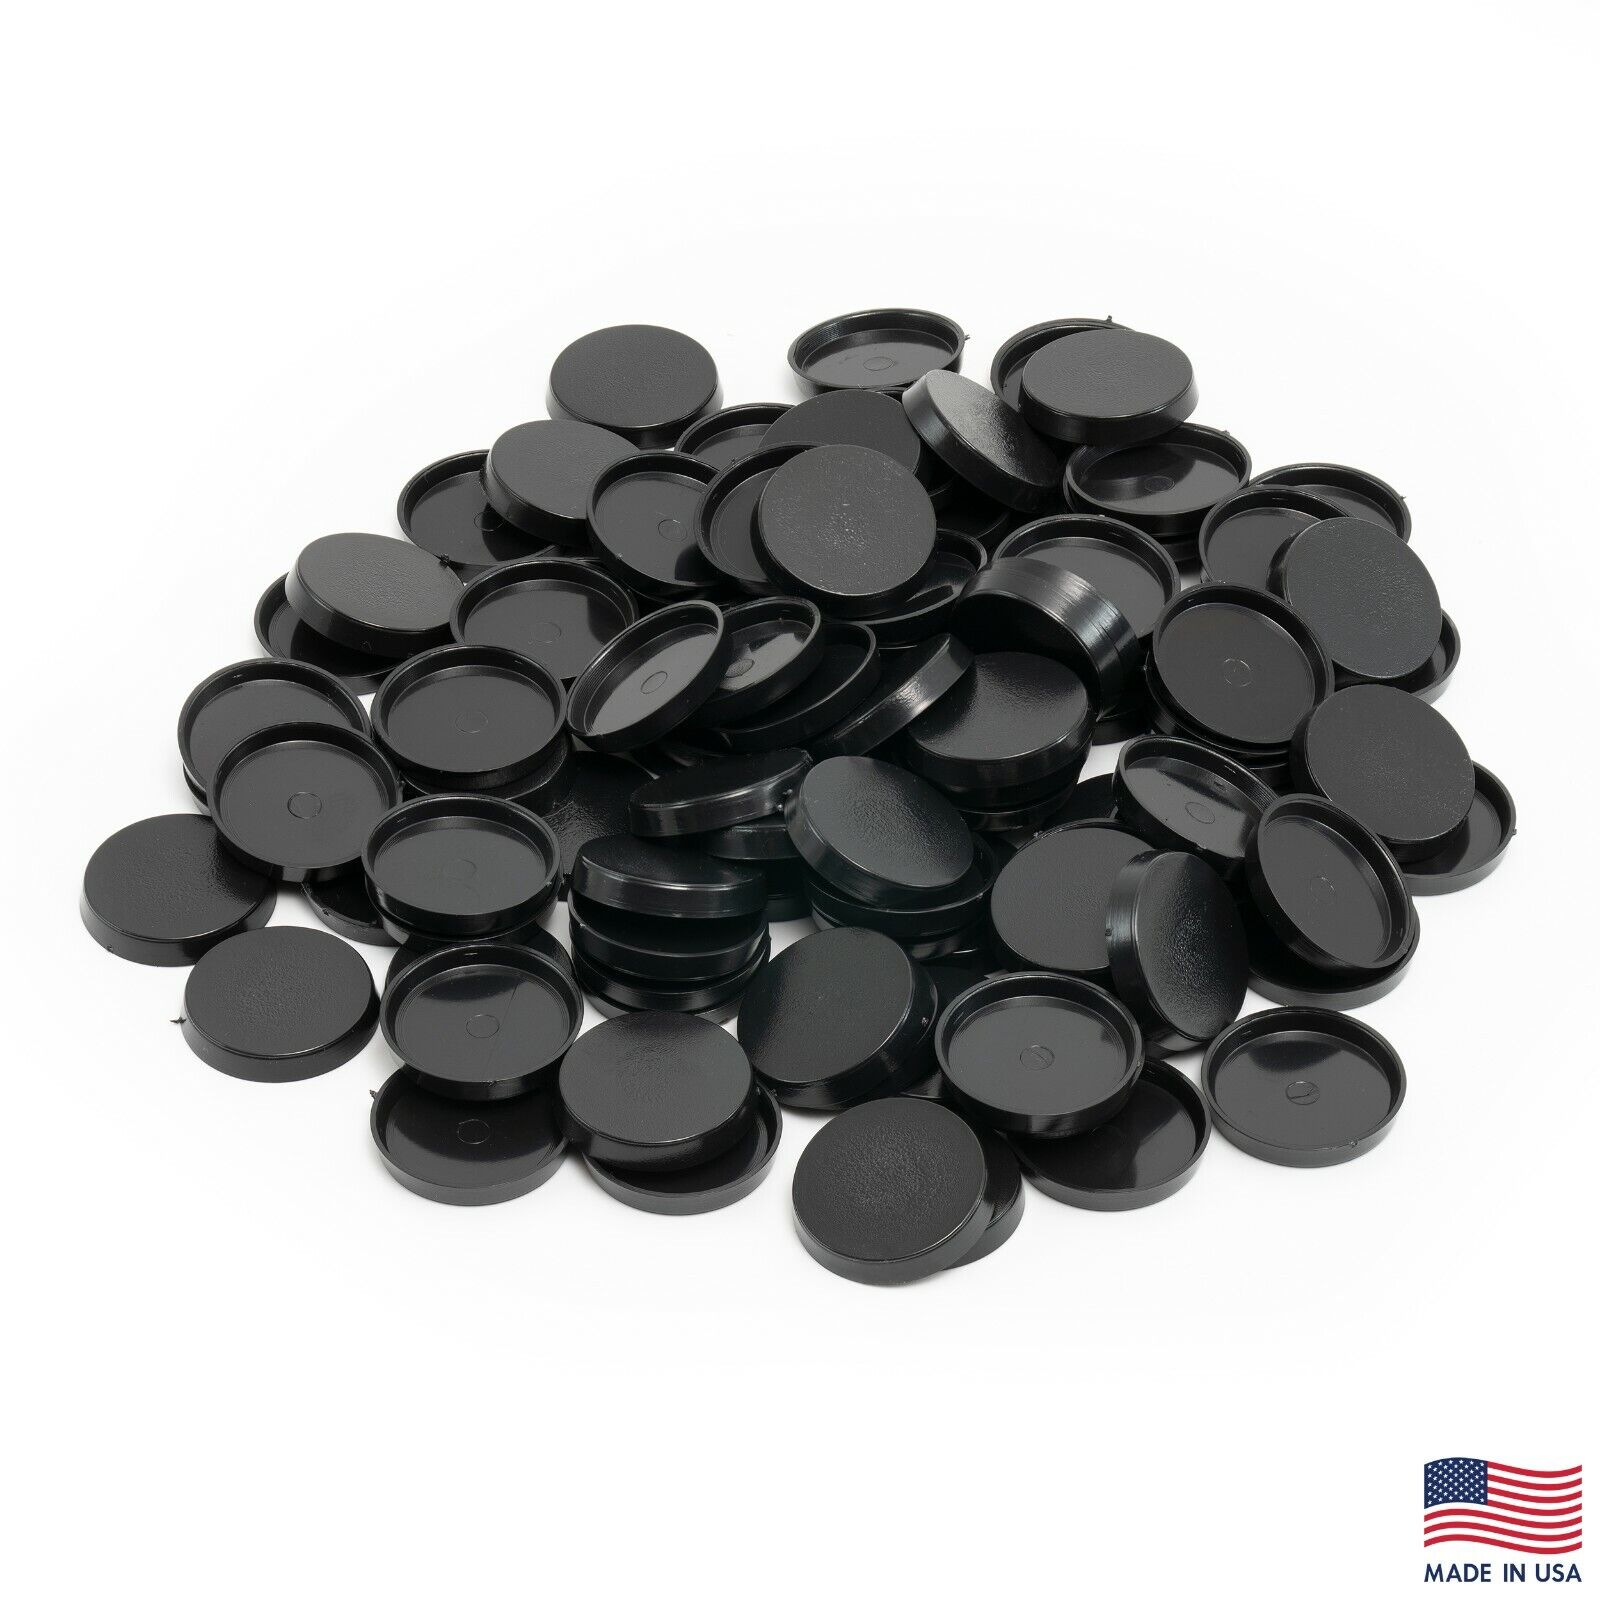 Pack of 100, 25 mm Plastic Round Bases Miniature Wargames Table Top gaming Unbranded